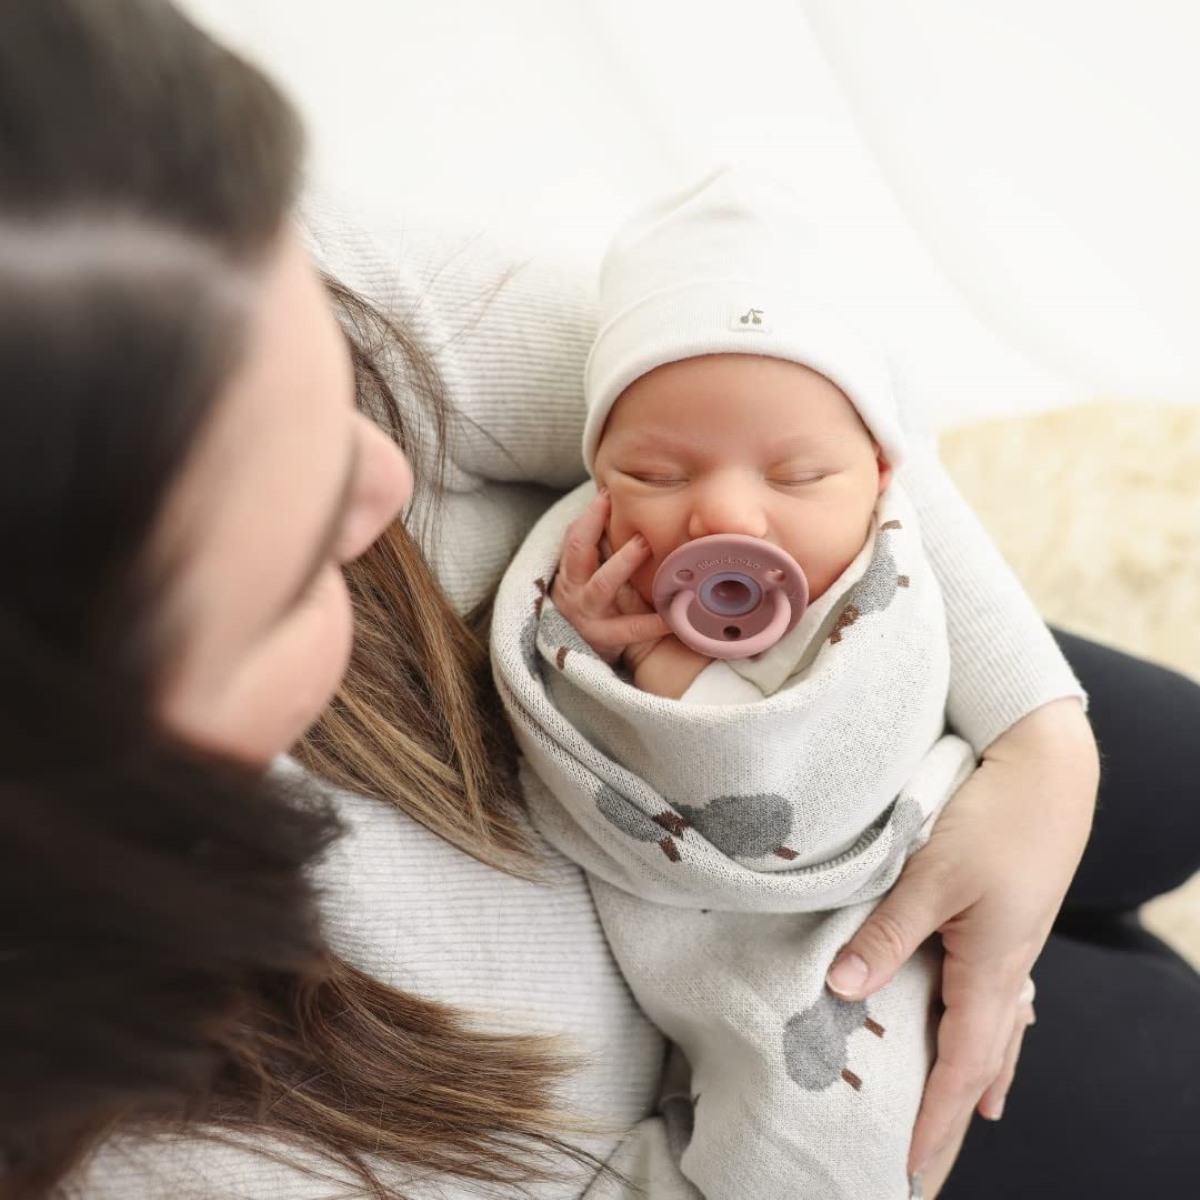 How To Swaddle Using A Blanket